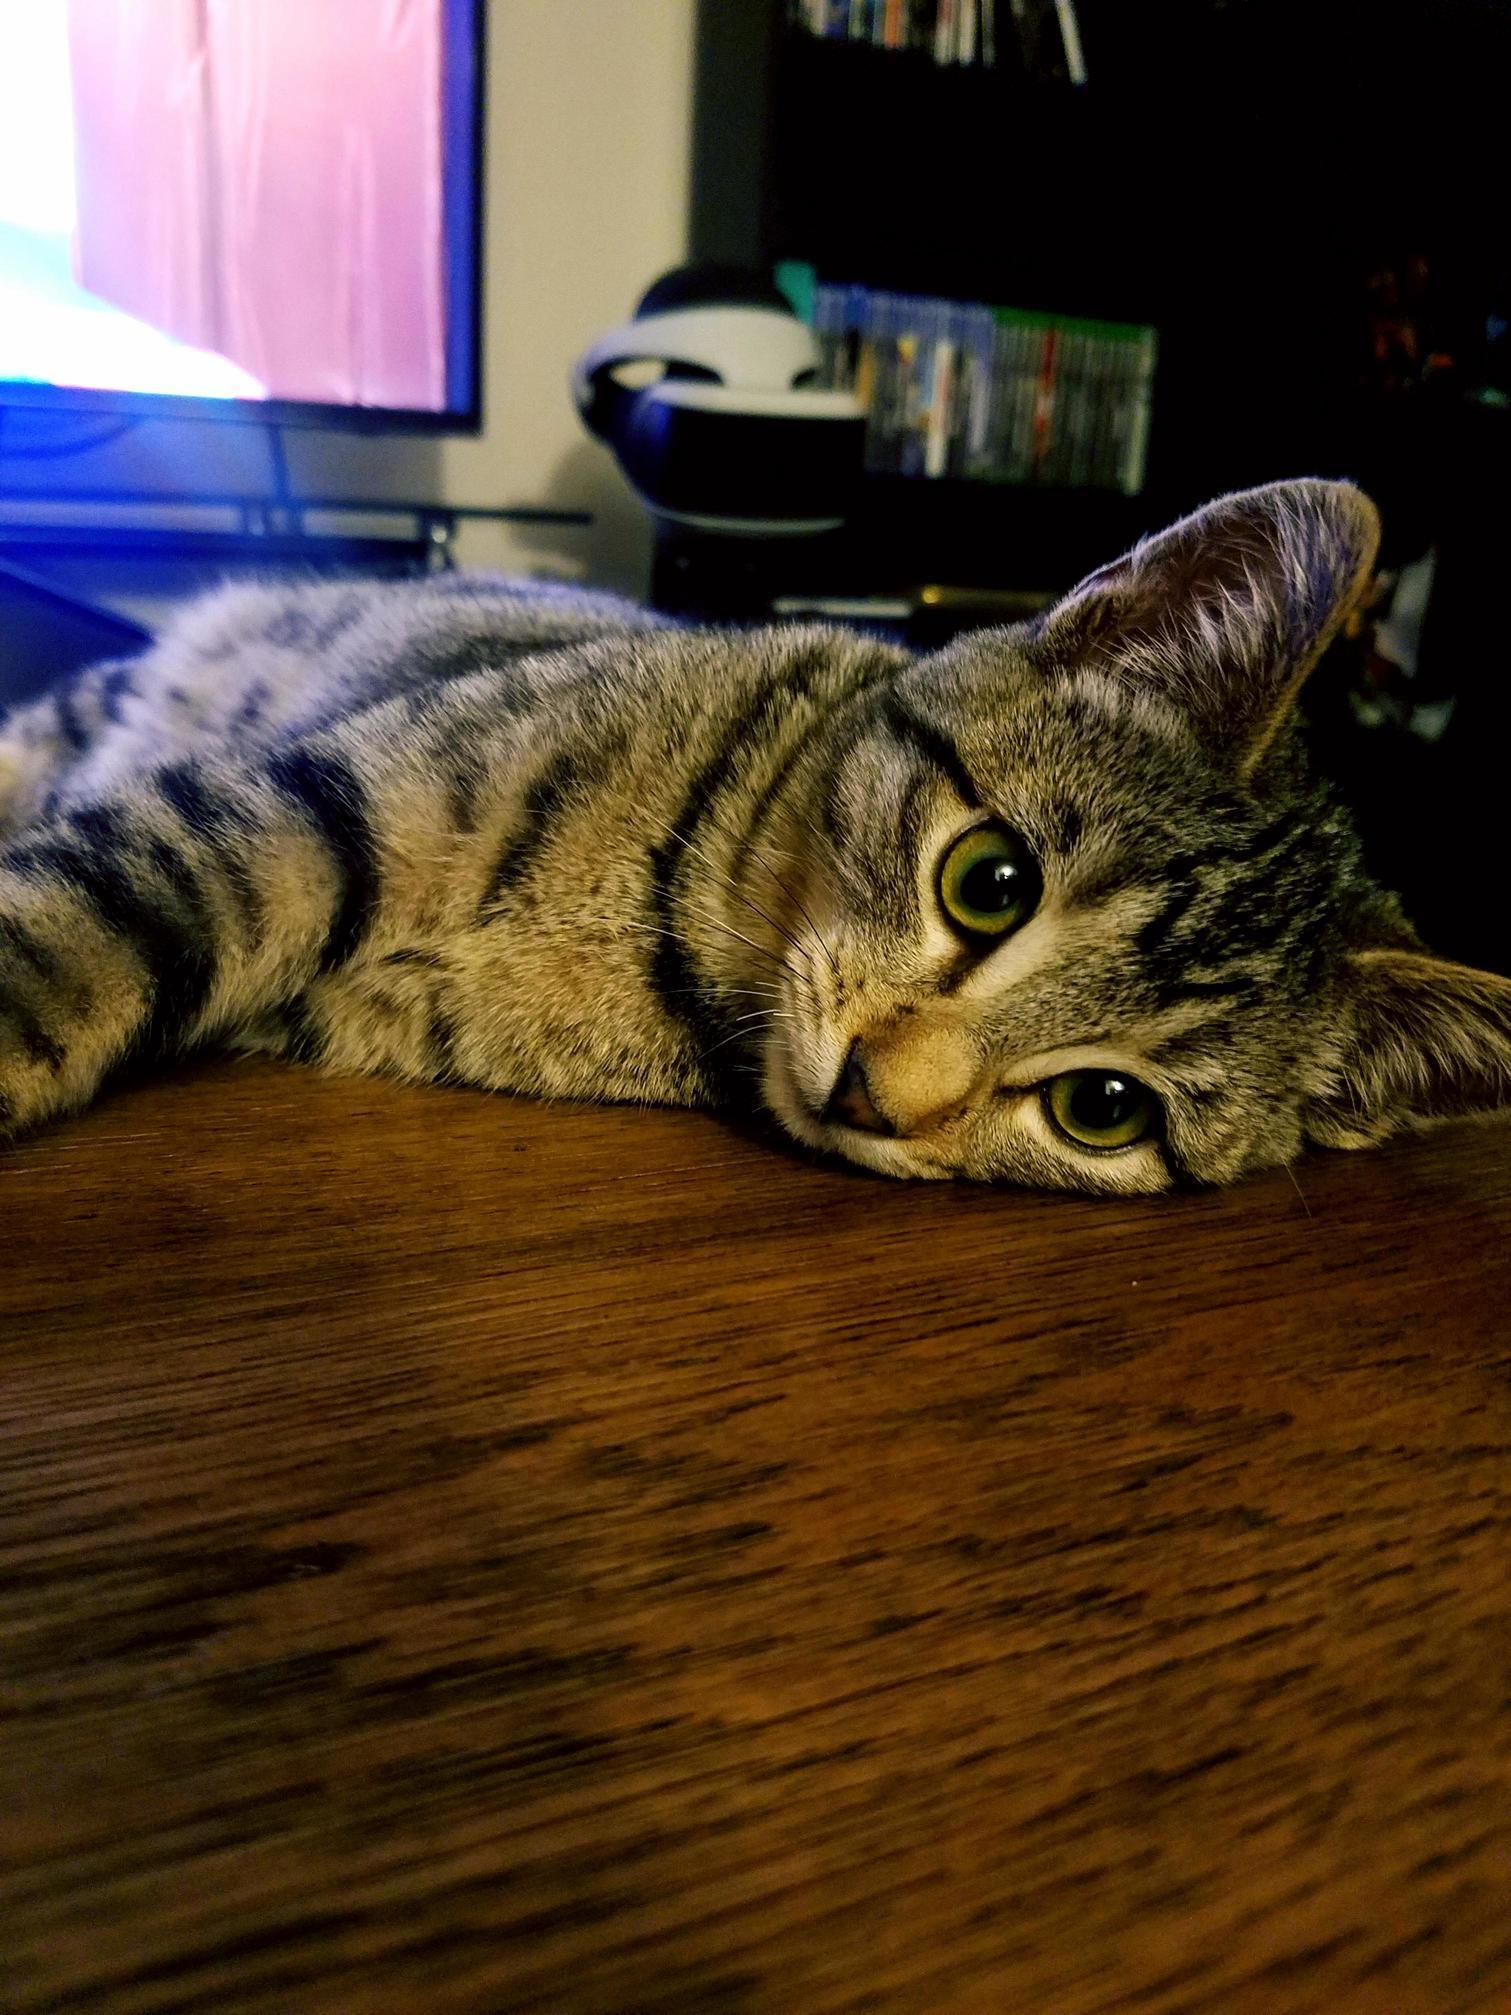 This is how he looks at me when i play games.